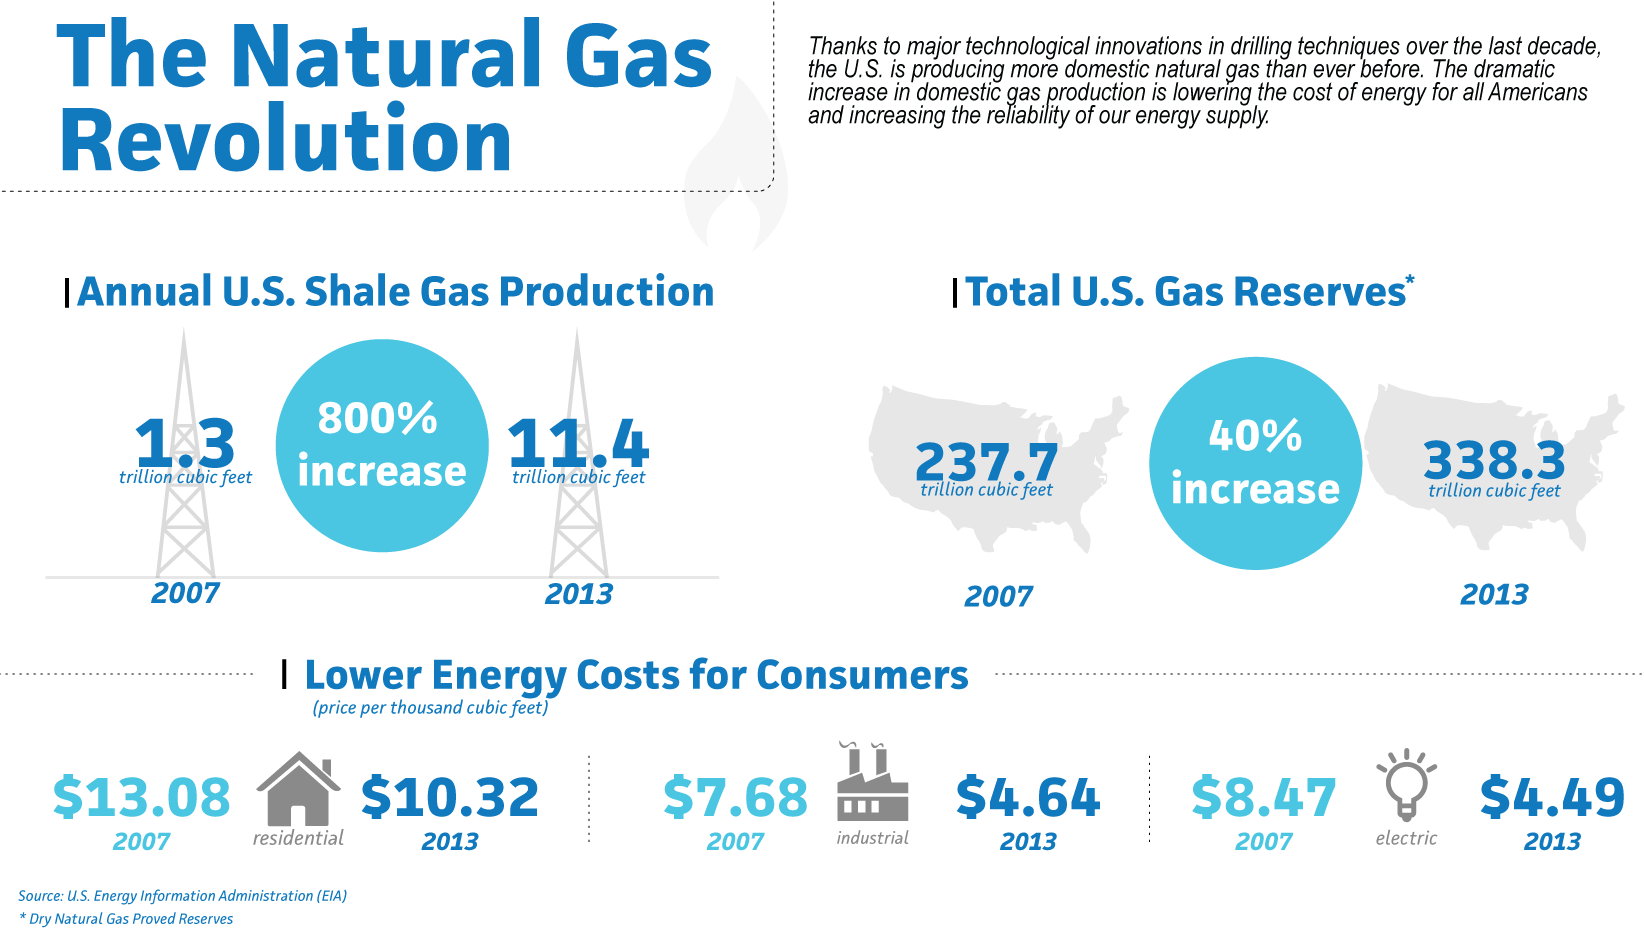 The Natural Gas Revolution infographic